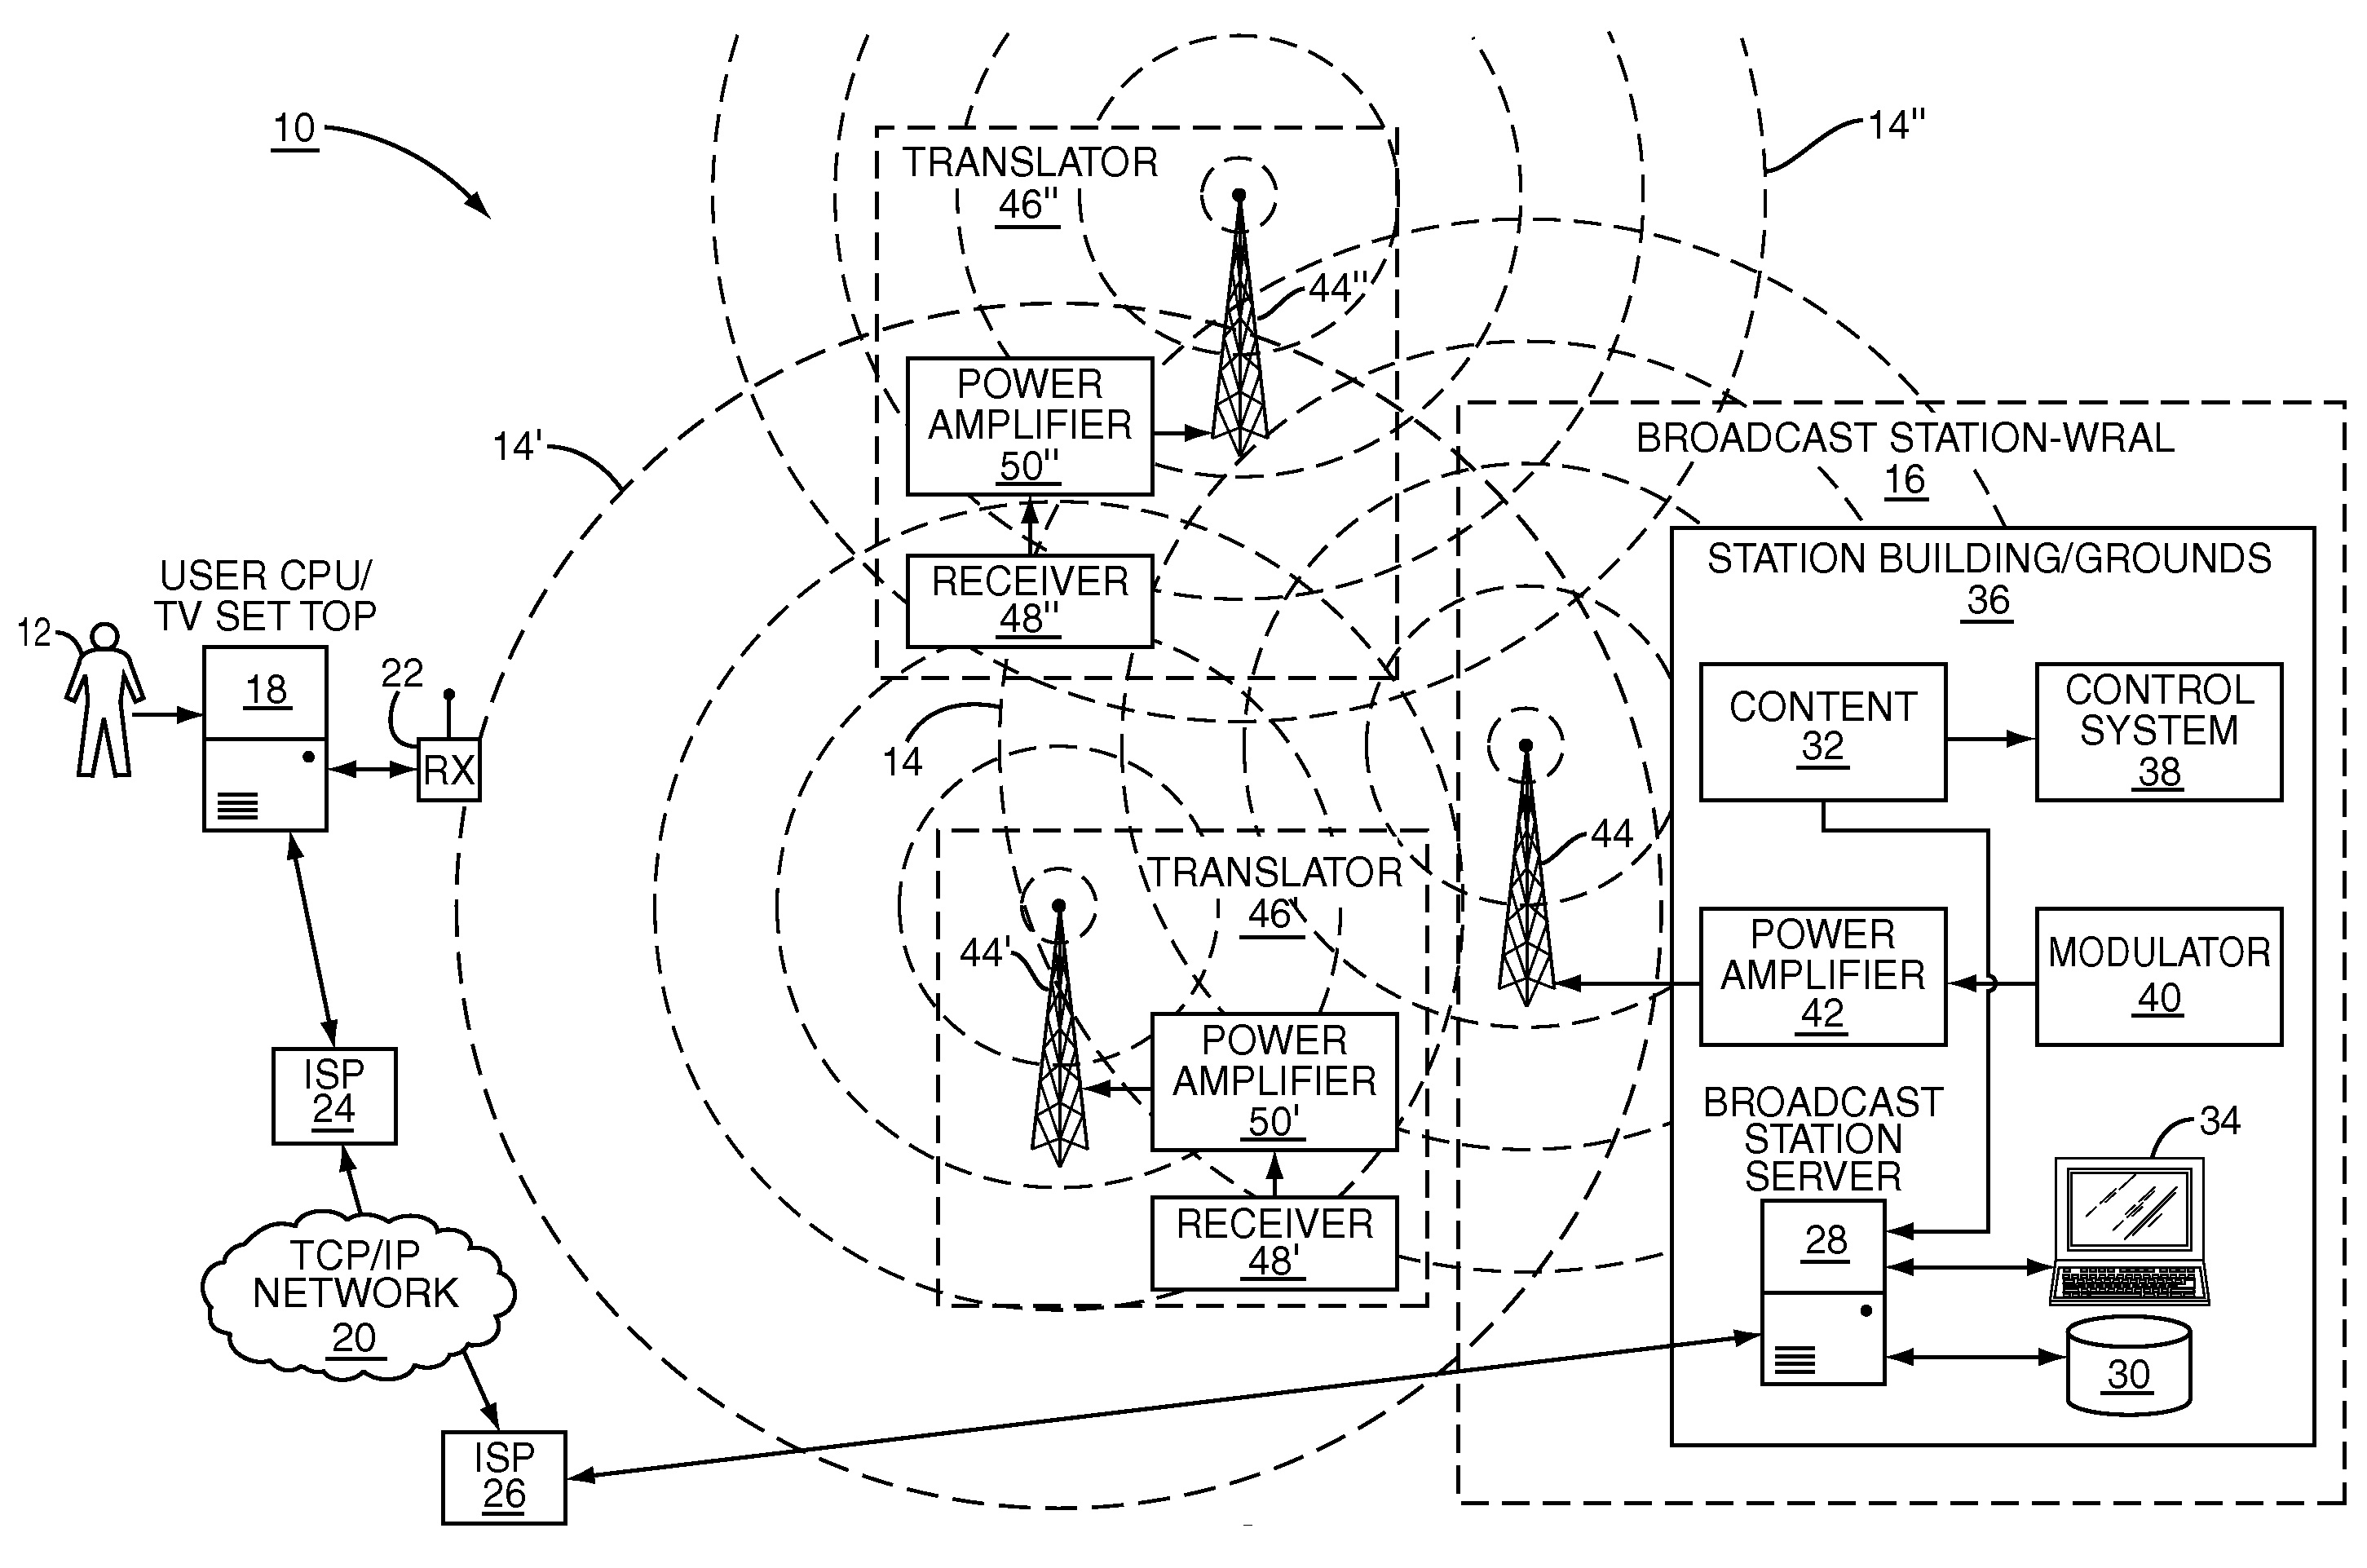 System and method for delivering geographically restricted content, such as over-air broadcast programming, to a recipient over a computer network, namely the internet